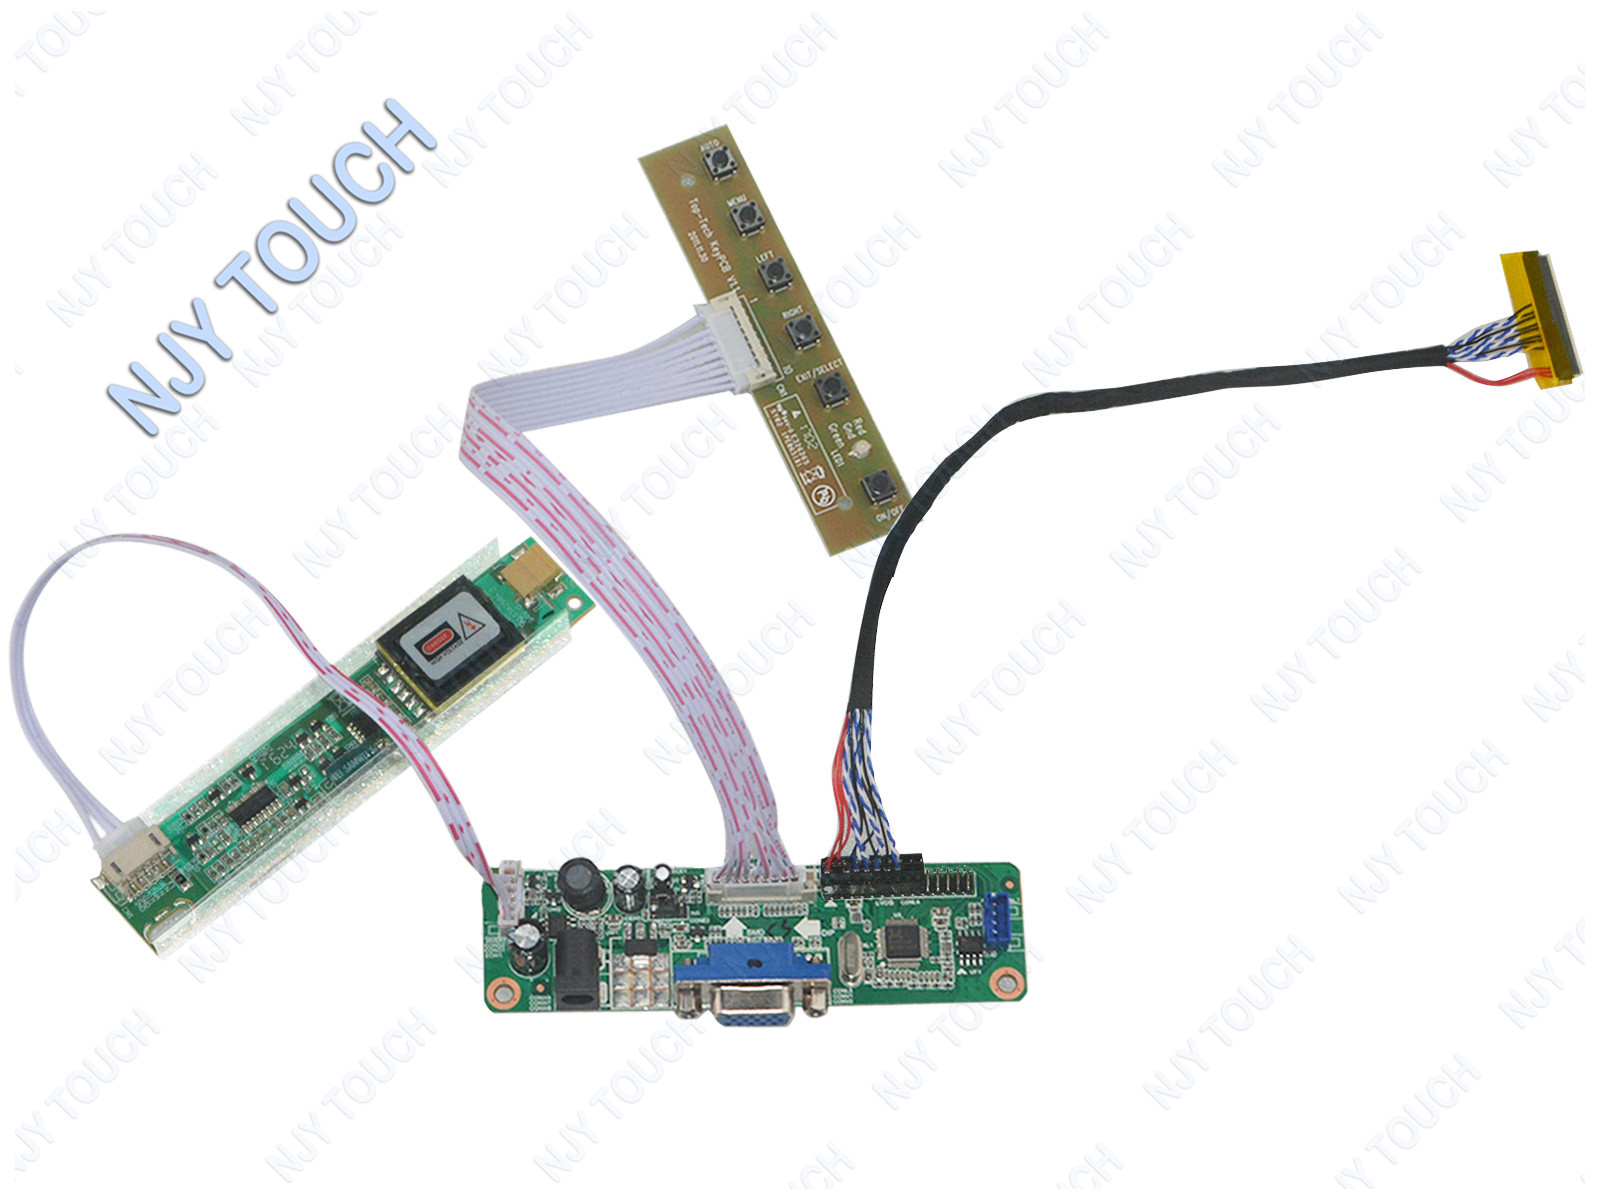 Controller Driver Board Kit For Lp156wh2-tle1